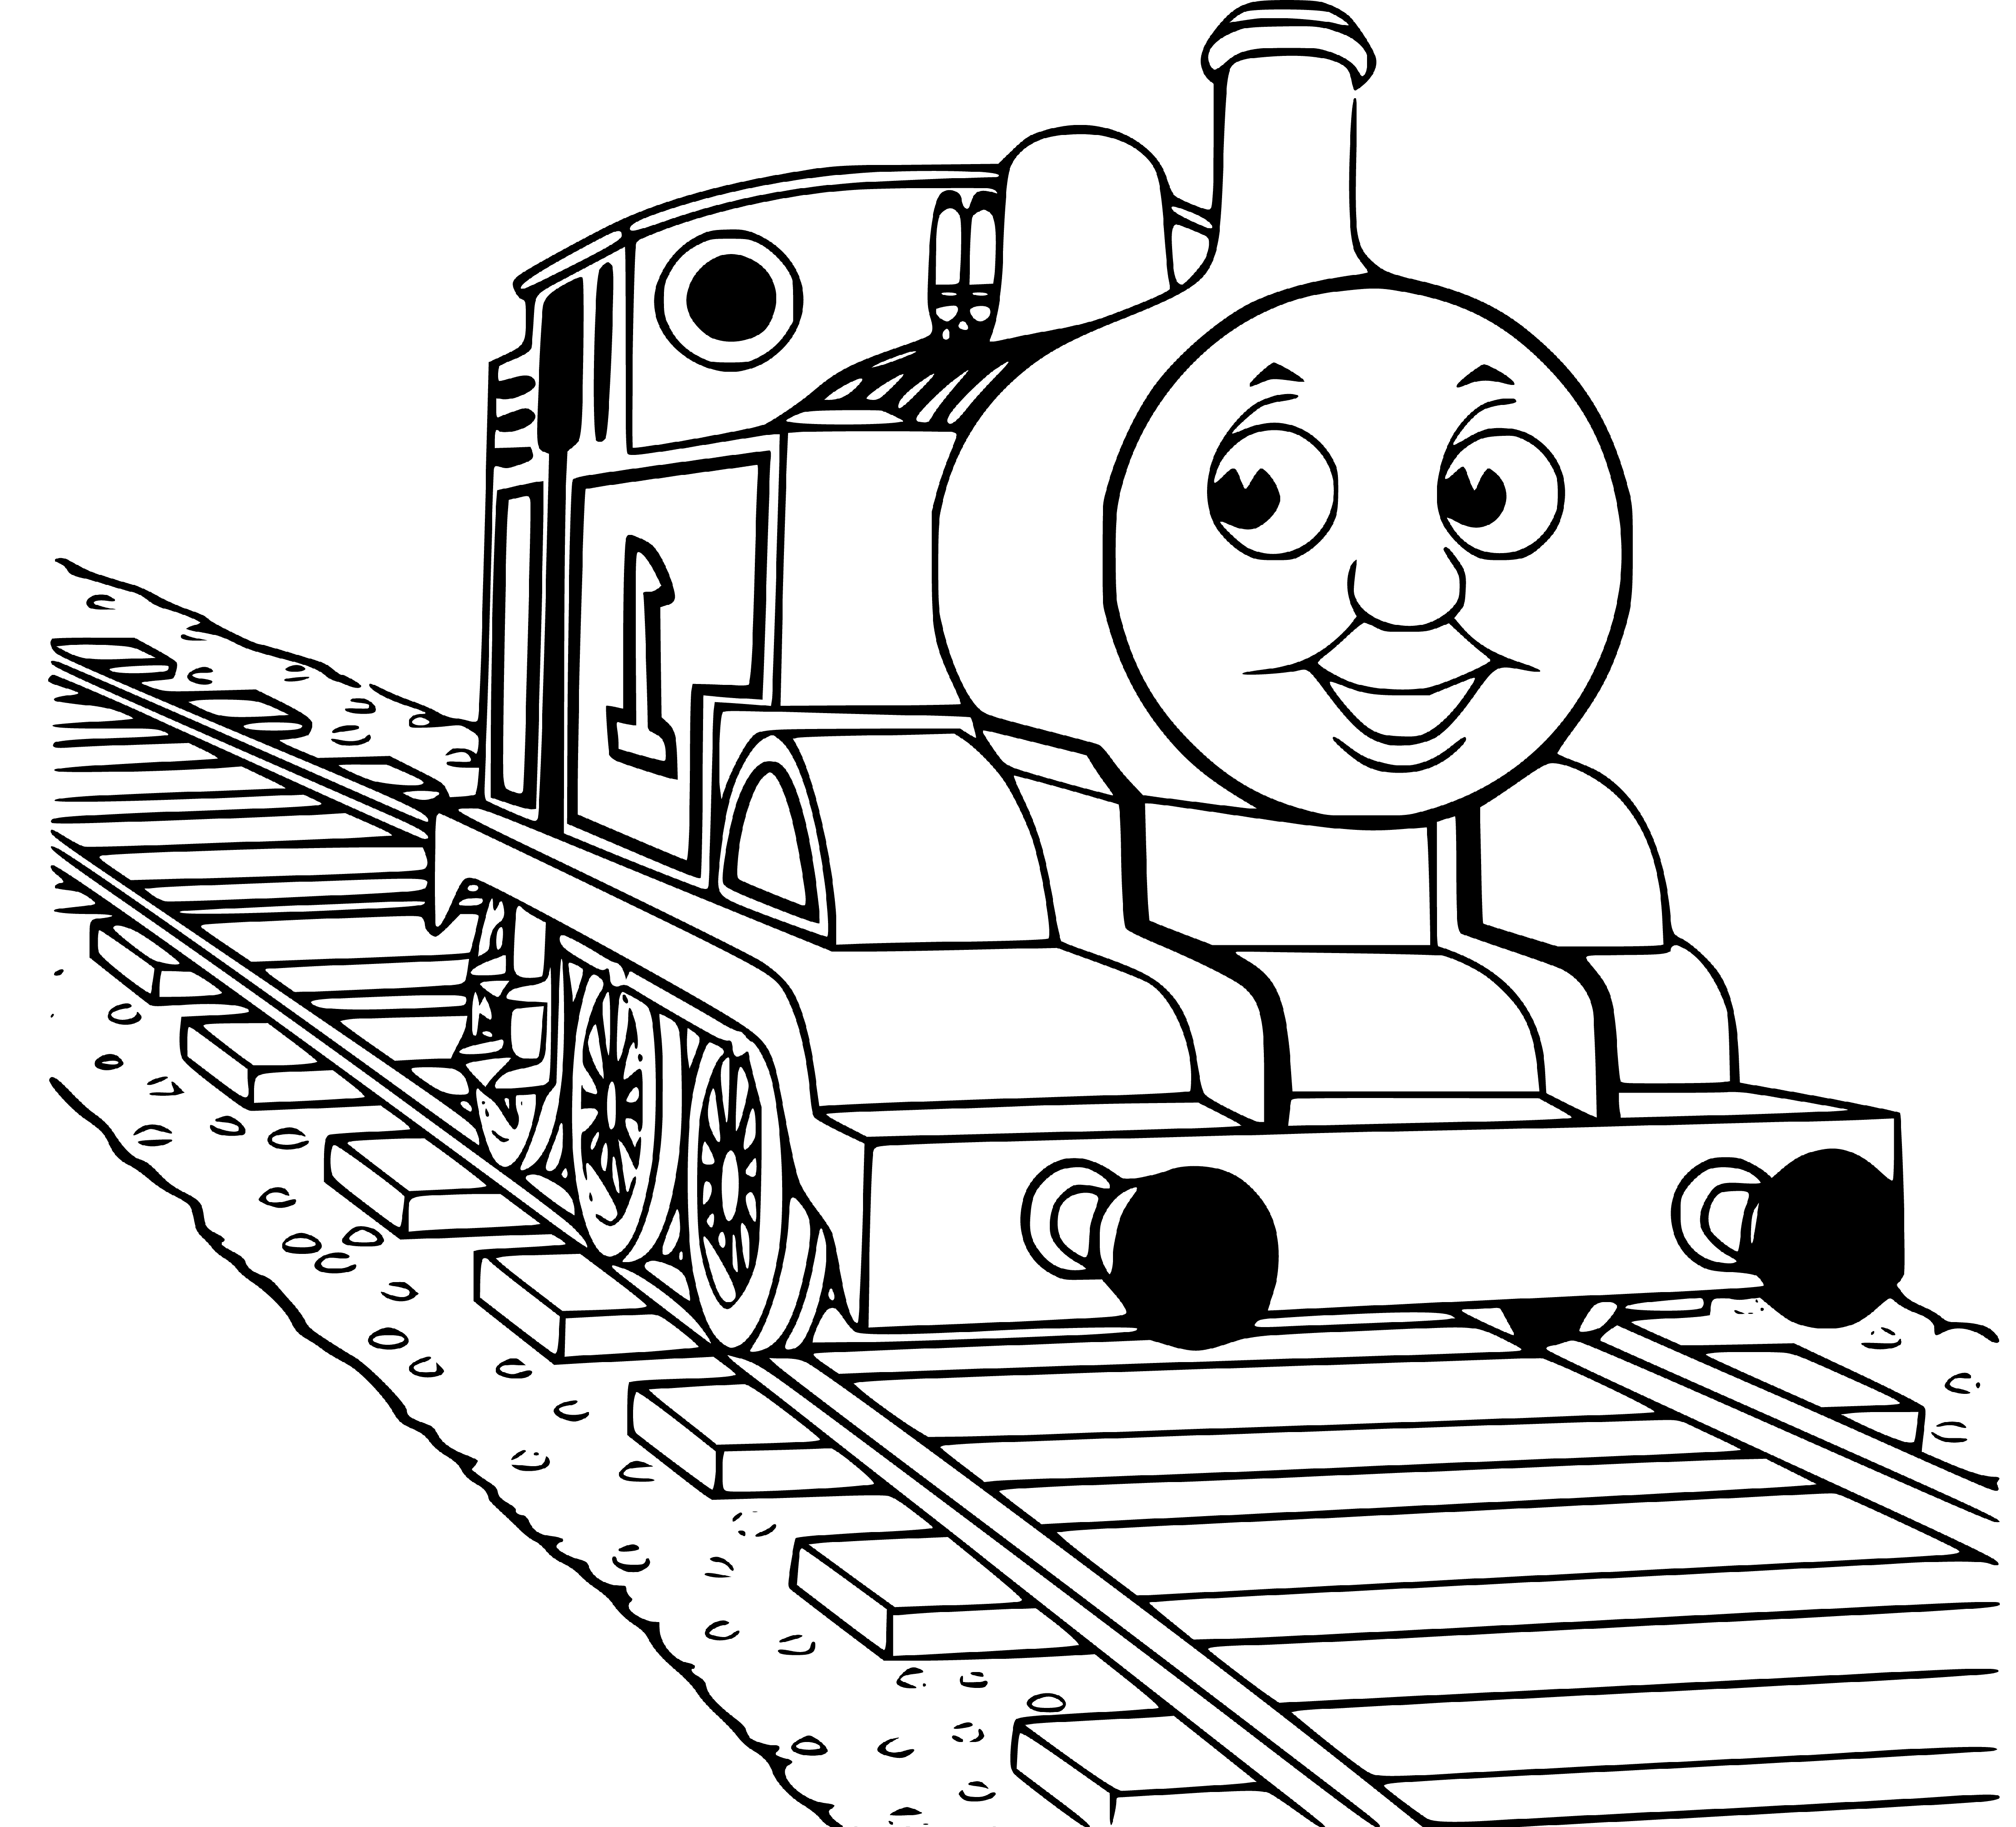 Printable Thomas the Train Coloring Sheets Easy for Kids - Blank ...